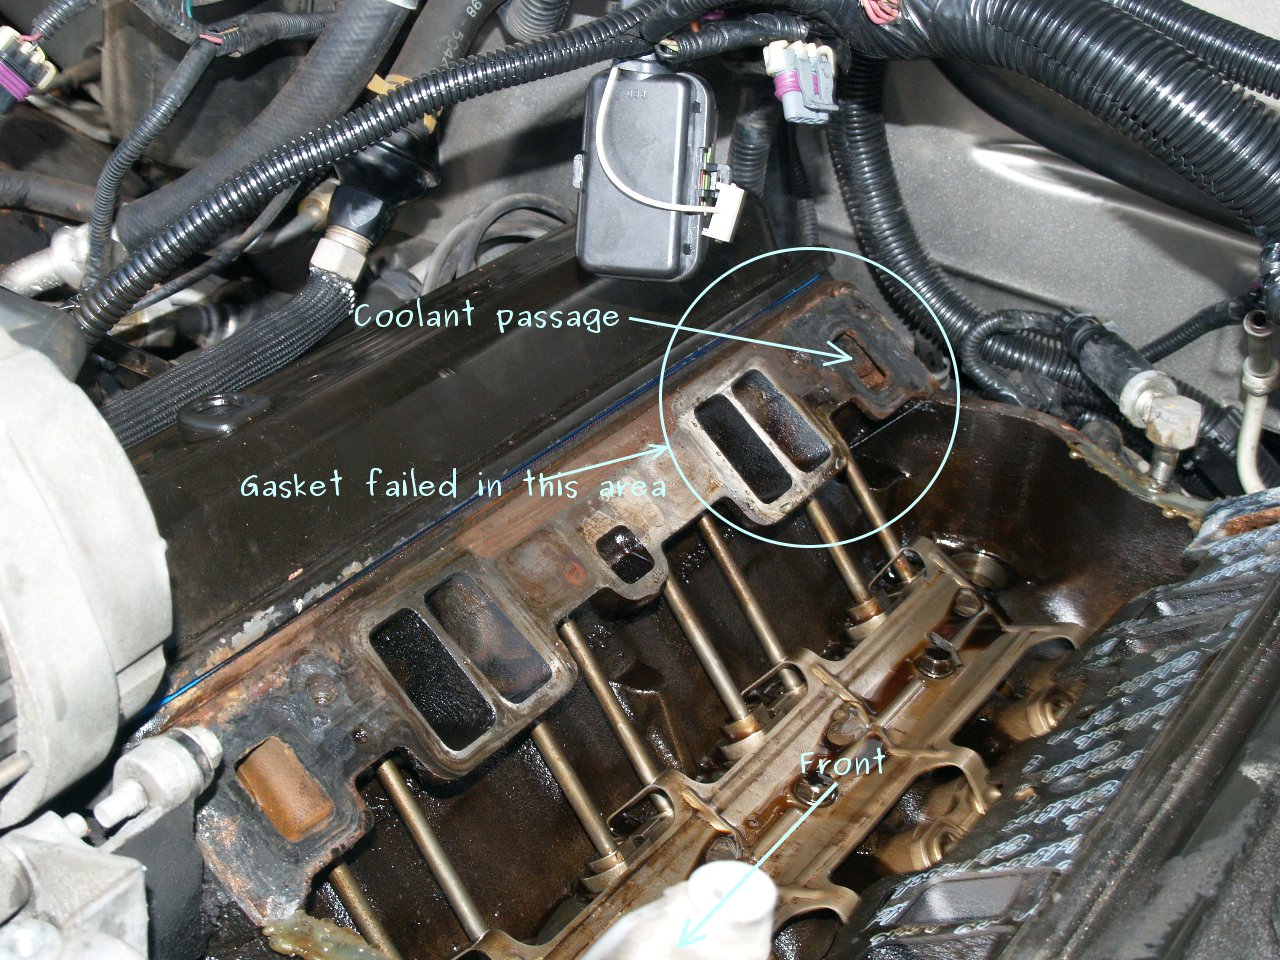 See P0459 in engine